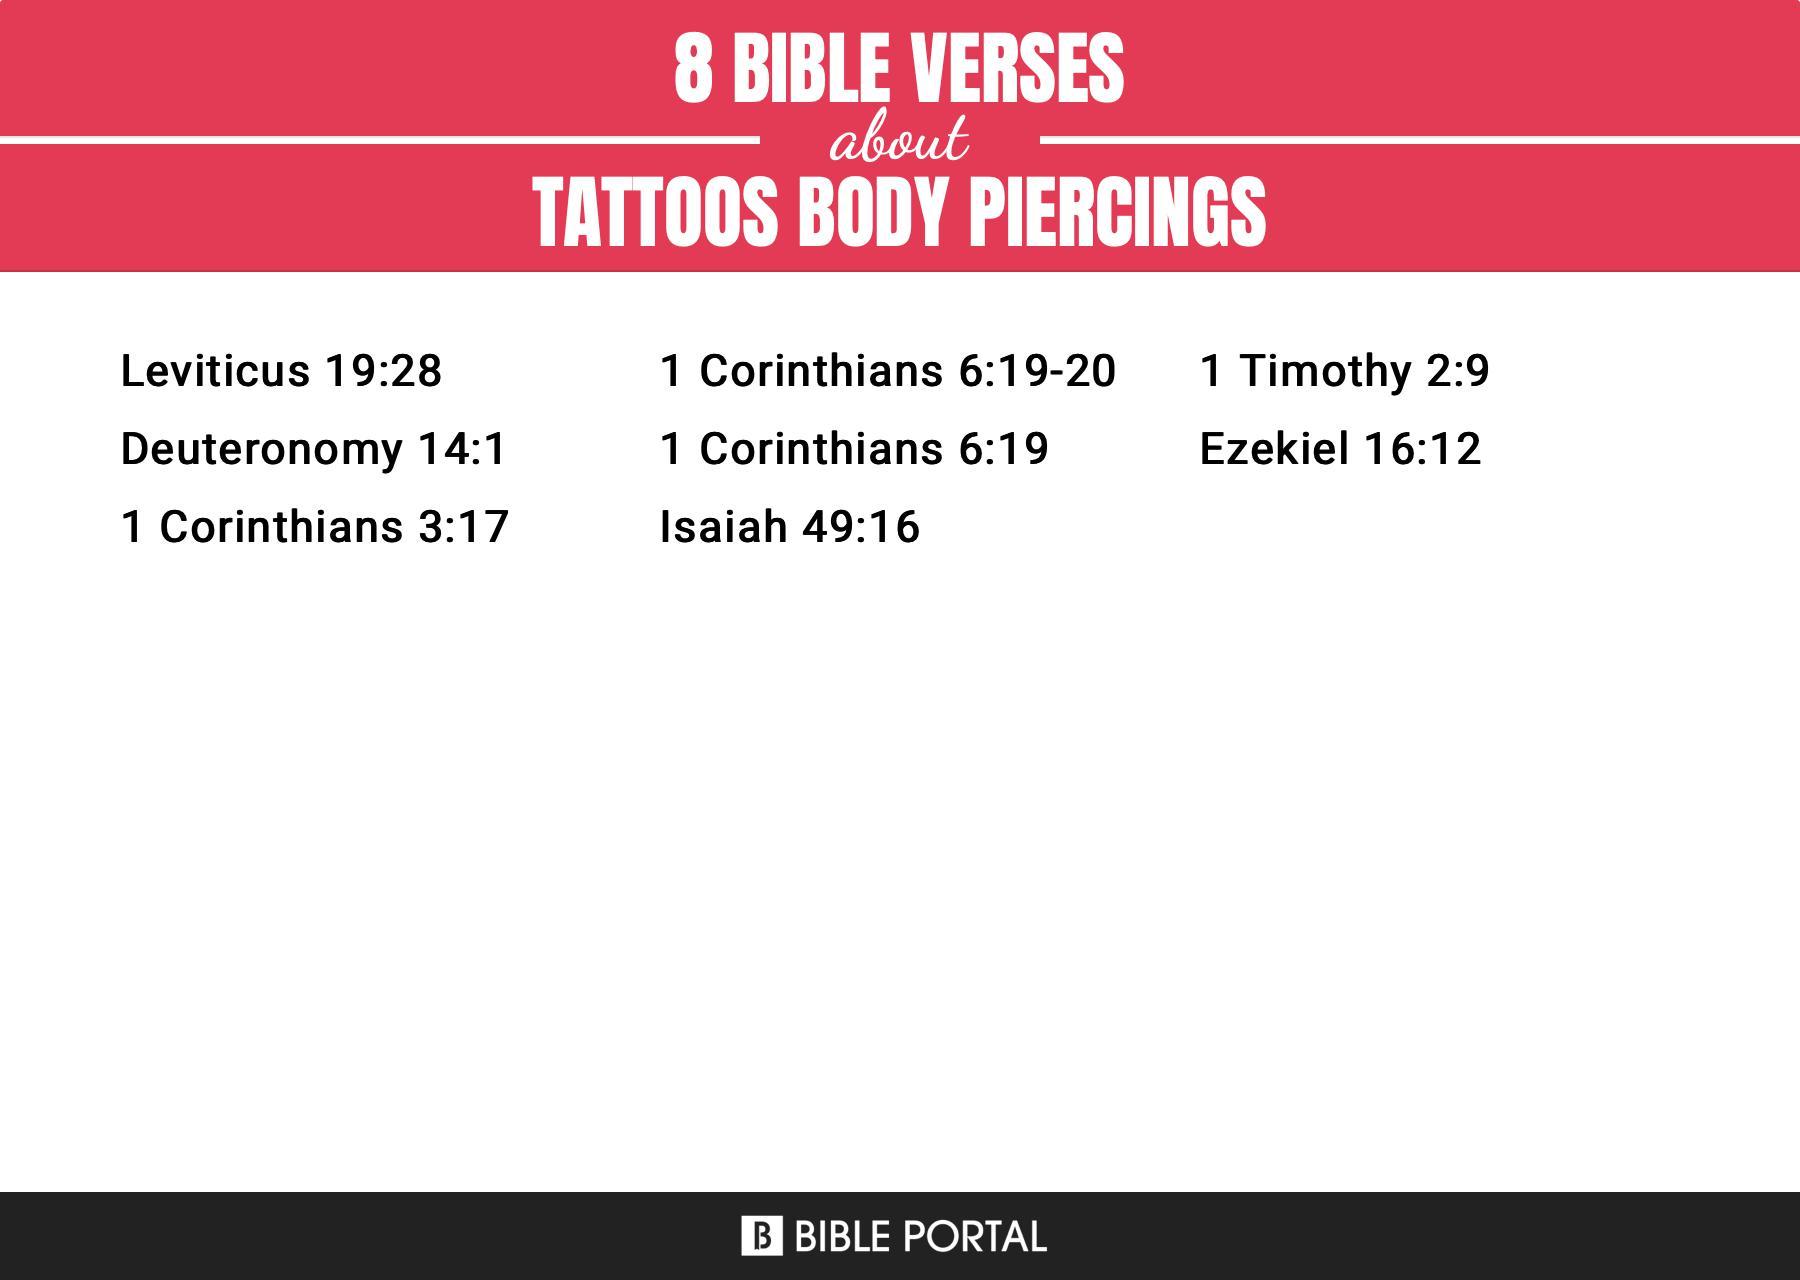 8 Bible Verses about Tattoos Body Piercings